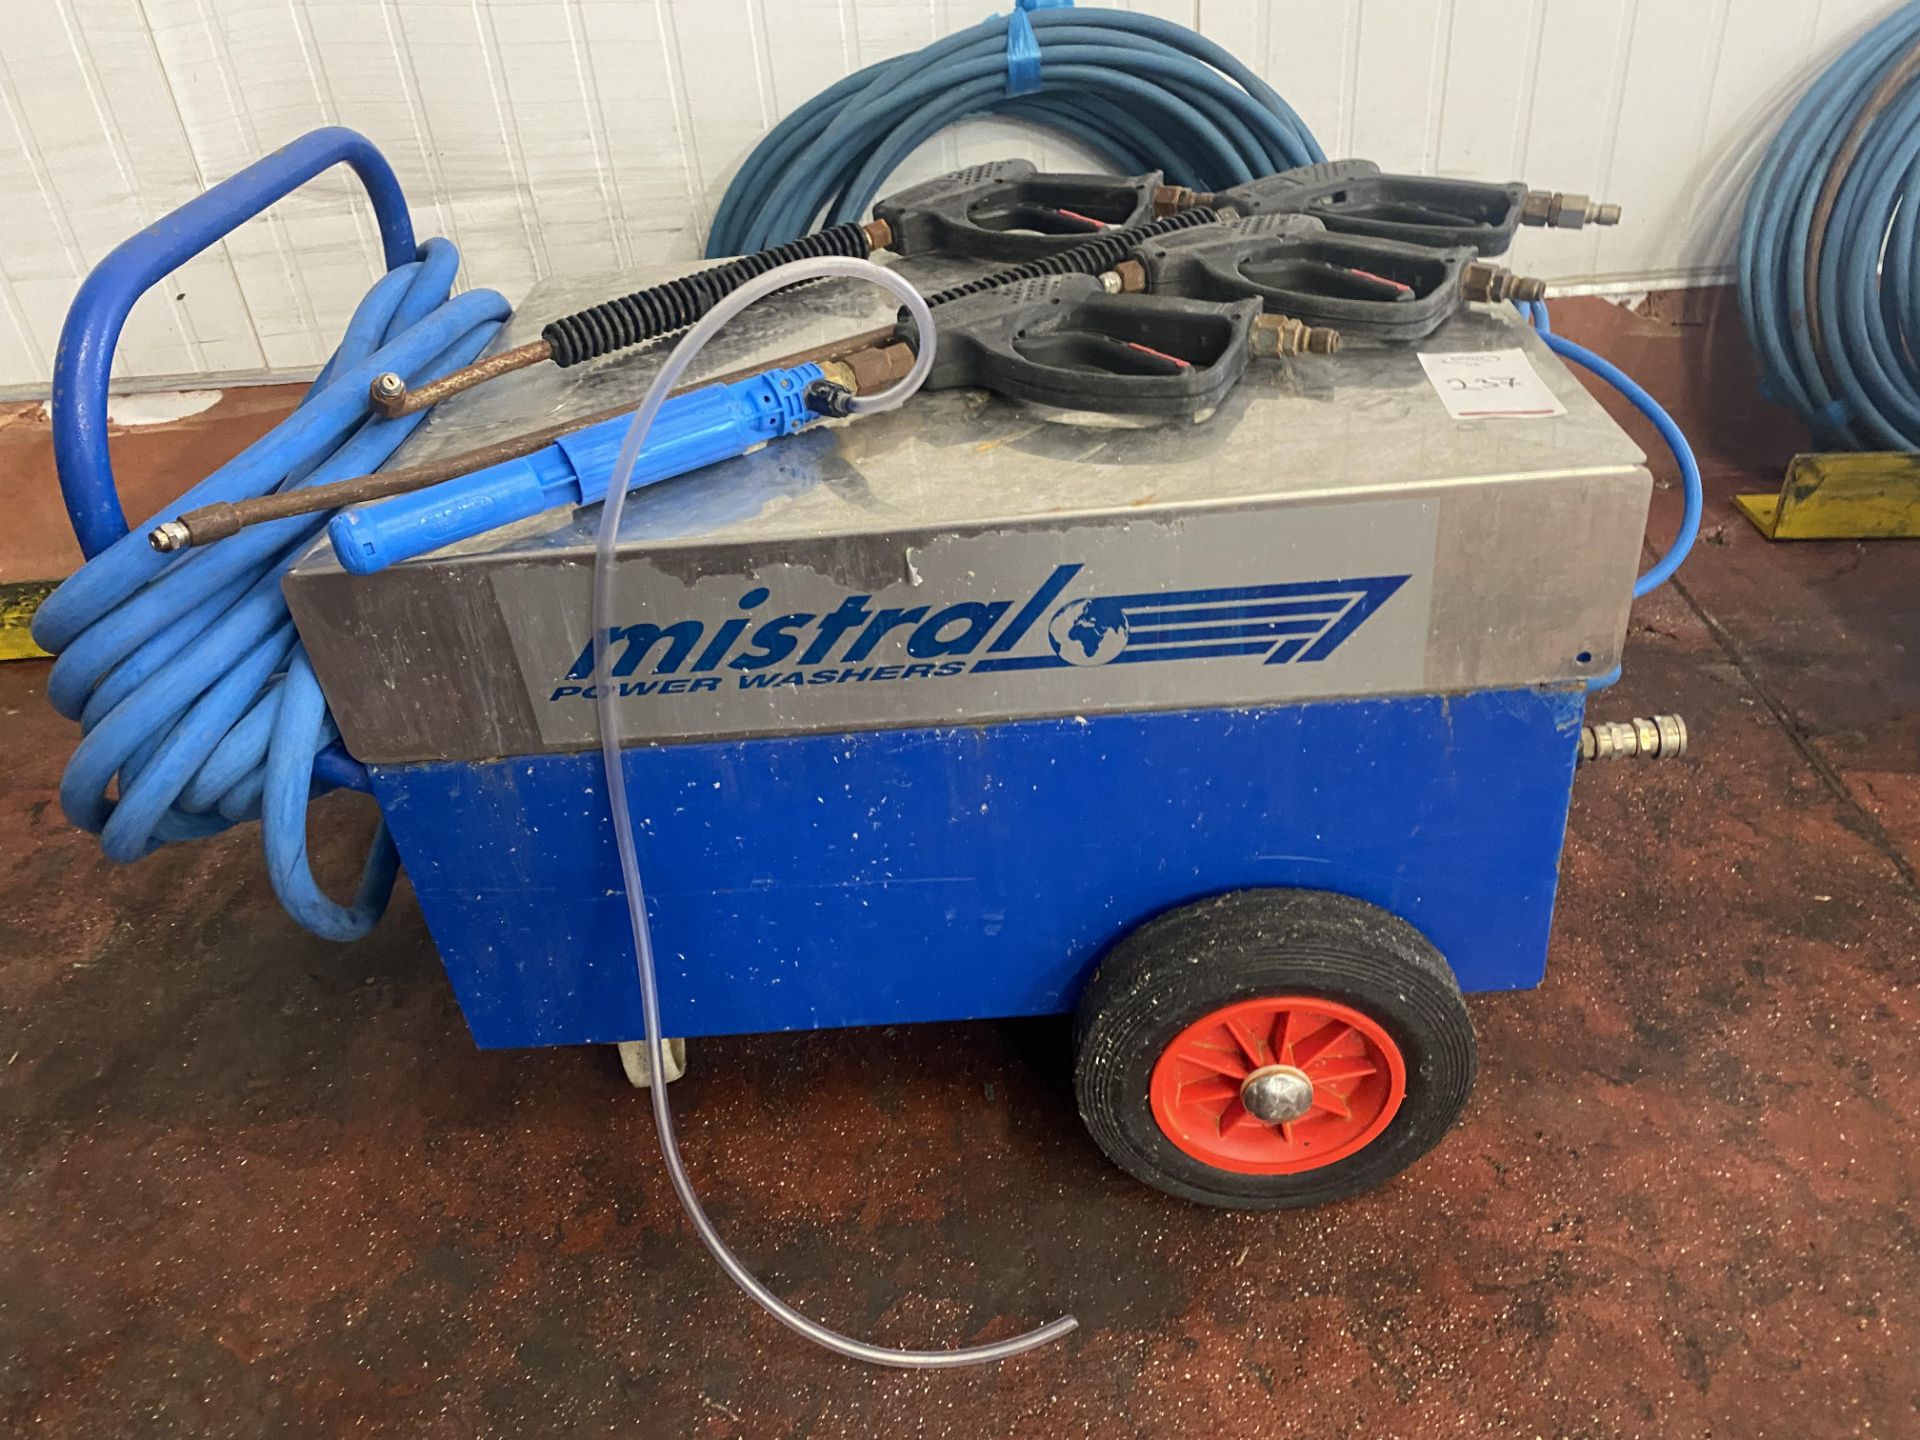 Mistral power washer (located in Factory 1)